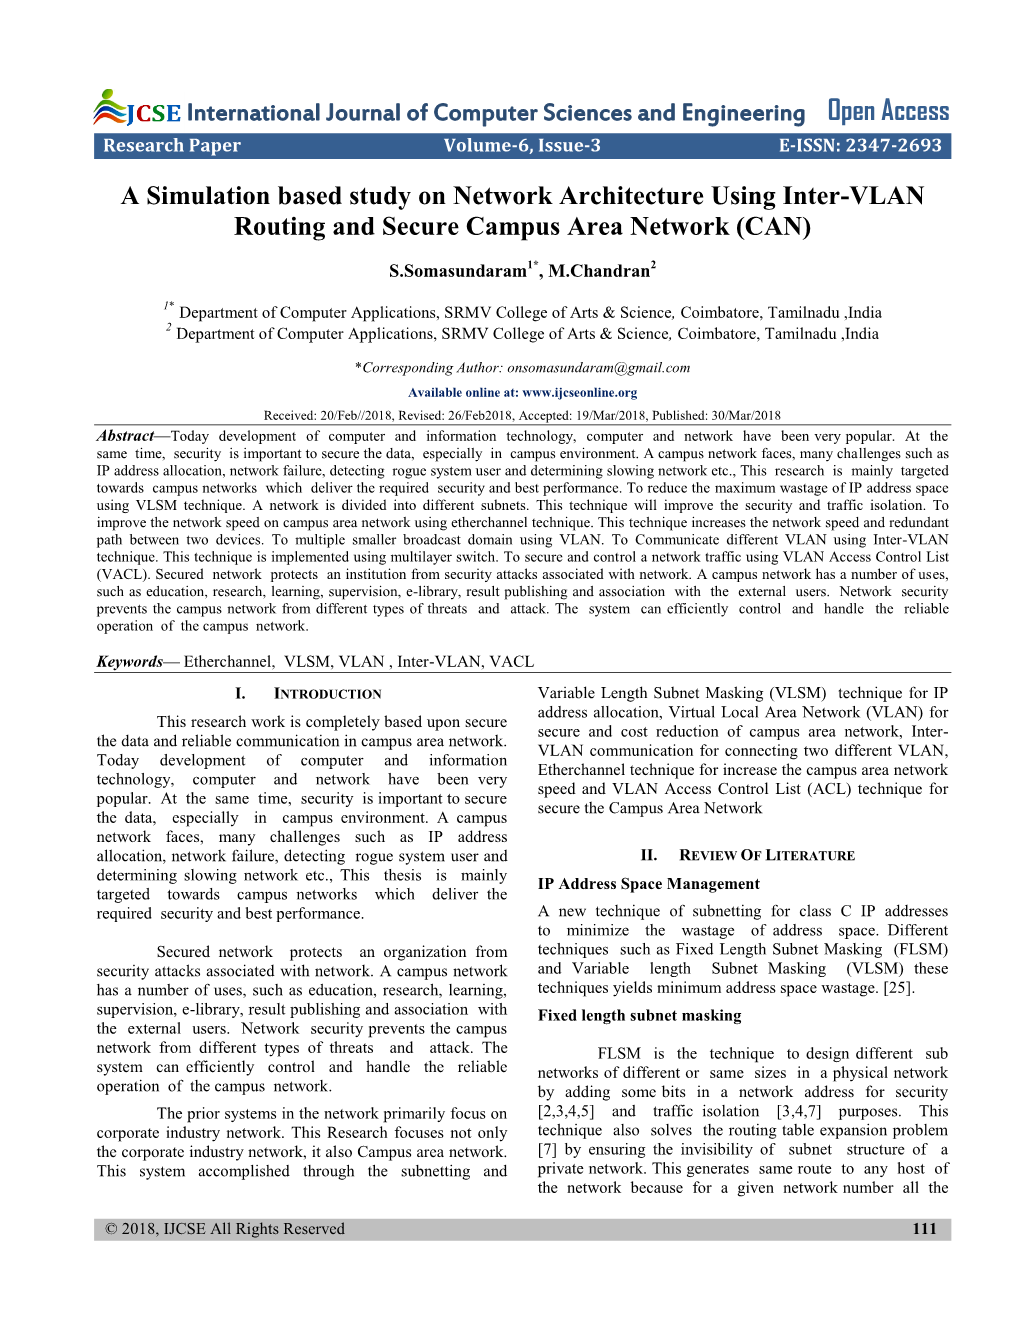 A Simulation Based Study on Network Architecture Using Inter-VLAN Routing and Secure Campus Area Network (CAN)